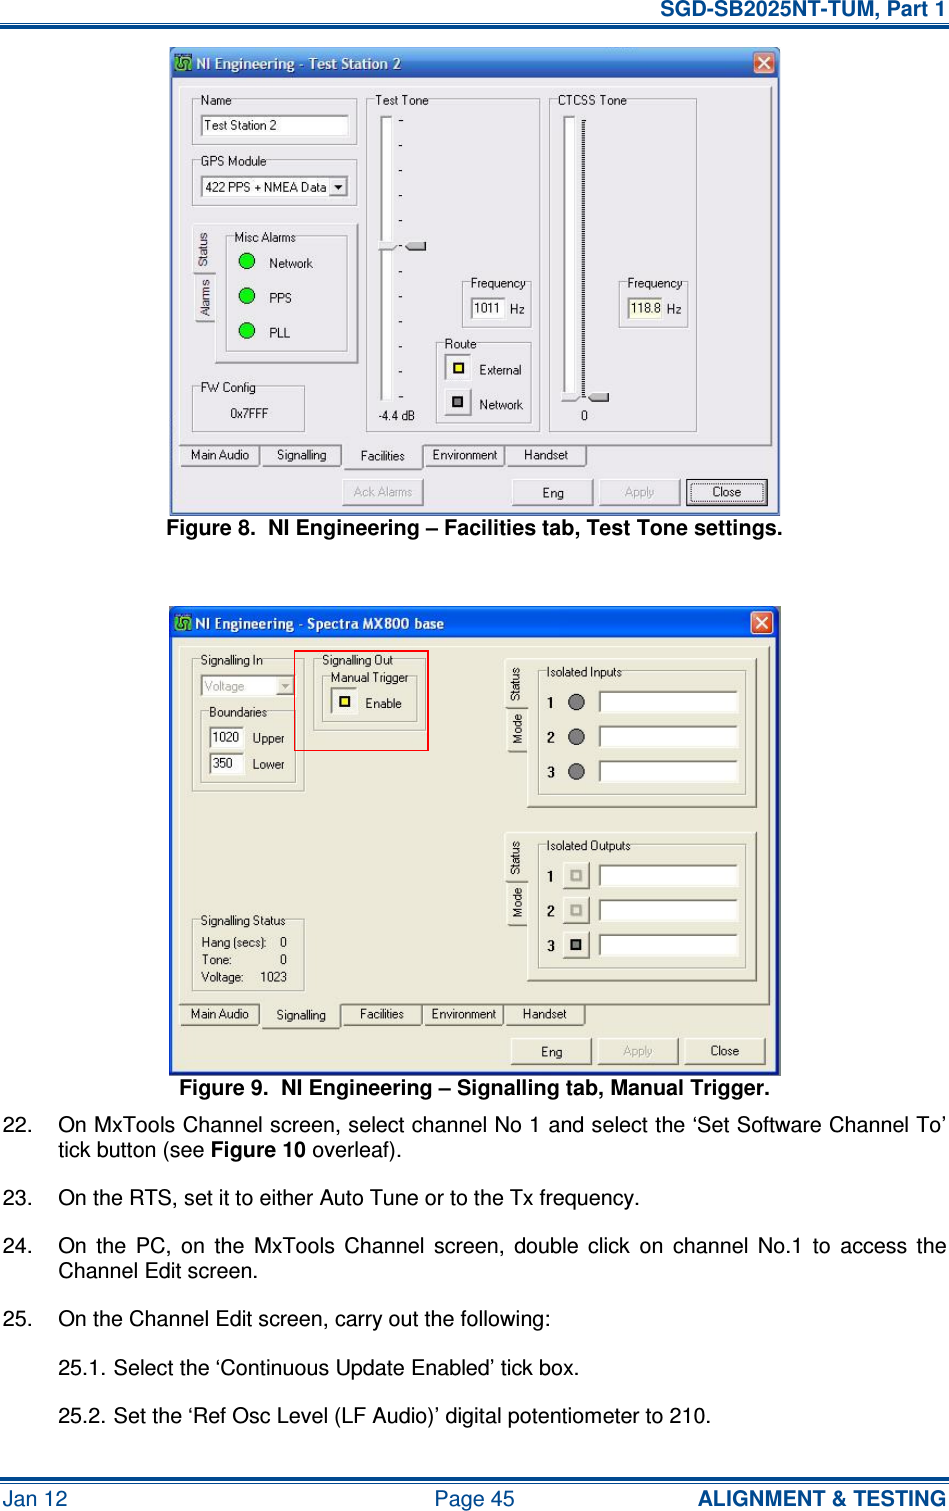   SGD-SB2025NT-TUM, Part 1 Jan 12  Page 45  ALIGNMENT &amp; TESTING Figure 8.  NI Engineering – Facilities tab, Test Tone settings.  Figure 9.  NI Engineering – Signalling tab, Manual Trigger. 22.  On MxTools Channel screen, select channel No 1 and select the ‘Set Software Channel To’ tick button (see Figure 10 overleaf). 23.  On the RTS, set it to either Auto Tune or to the Tx frequency. 24.  On  the  PC,  on  the  MxTools  Channel  screen,  double  click  on  channel  No.1  to  access  the Channel Edit screen. 25.  On the Channel Edit screen, carry out the following: 25.1. Select the ‘Continuous Update Enabled’ tick box. 25.2. Set the ‘Ref Osc Level (LF Audio)’ digital potentiometer to 210. 